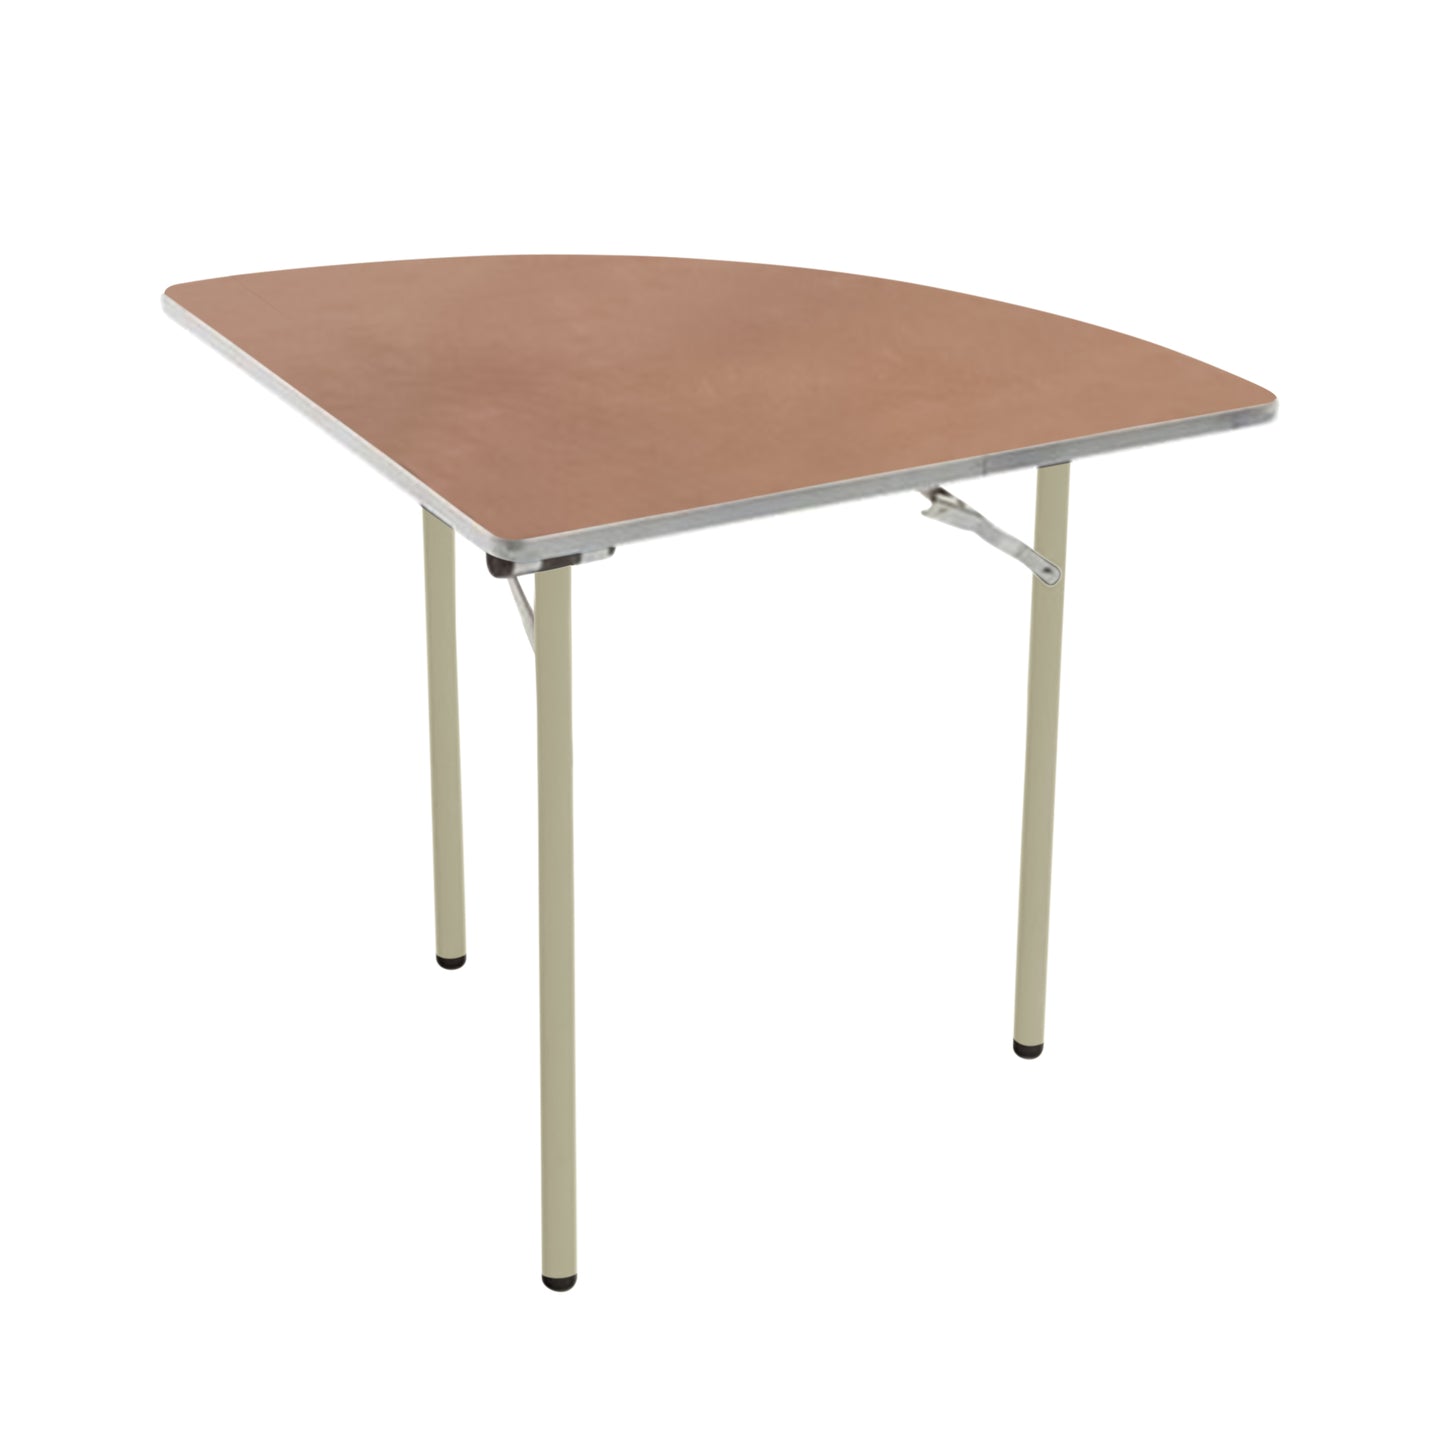 AmTab Folding Table - Plywood Stained and Sealed - Aluminum Edge - Quarter Round - Quarter 96" Diameter x 29"H  (AmTab AMT-QR96PA)